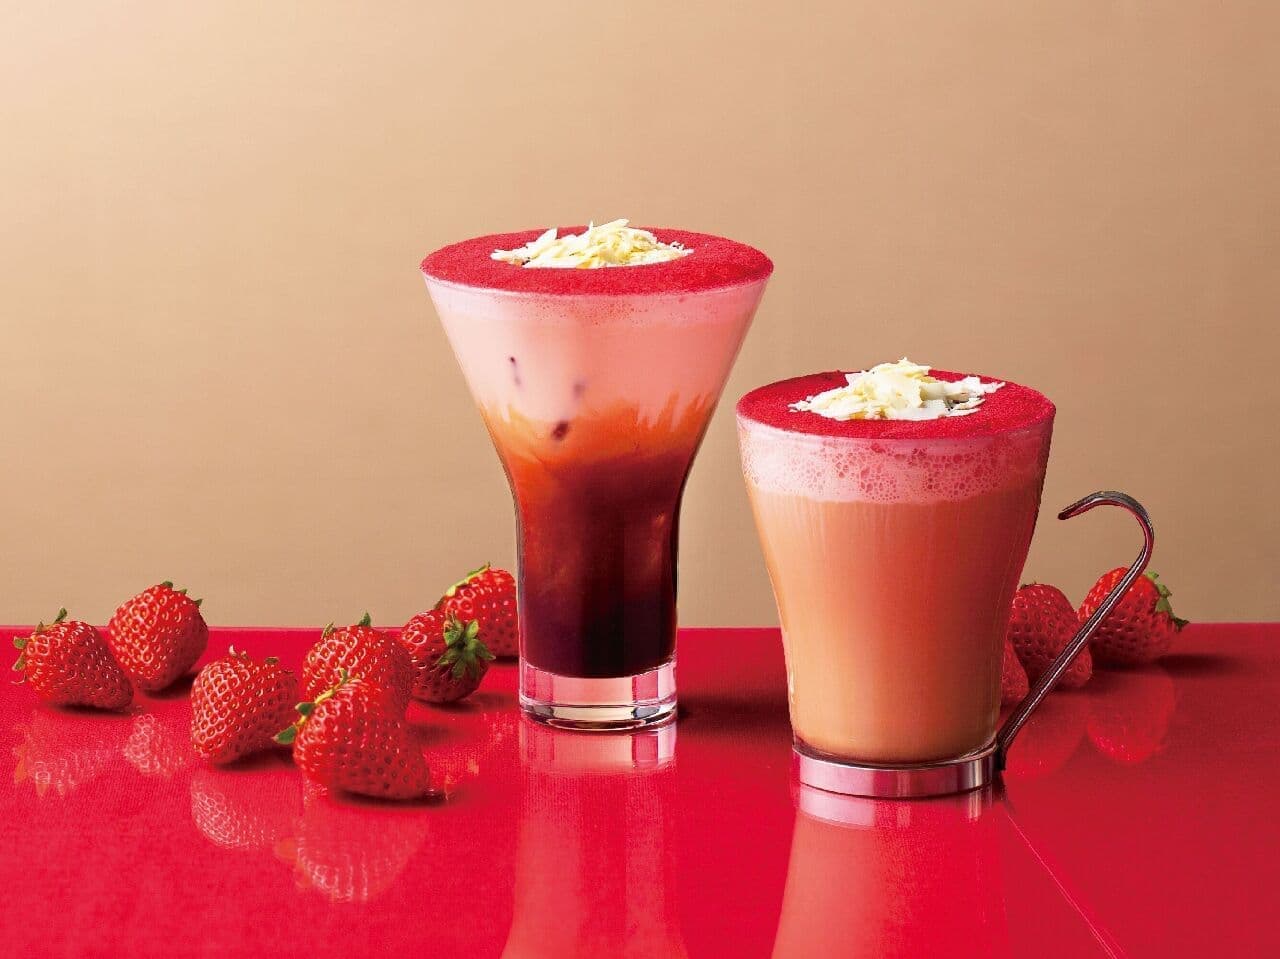 Illy Cafe "Dolce Presso Strawberry & White Chocolate"